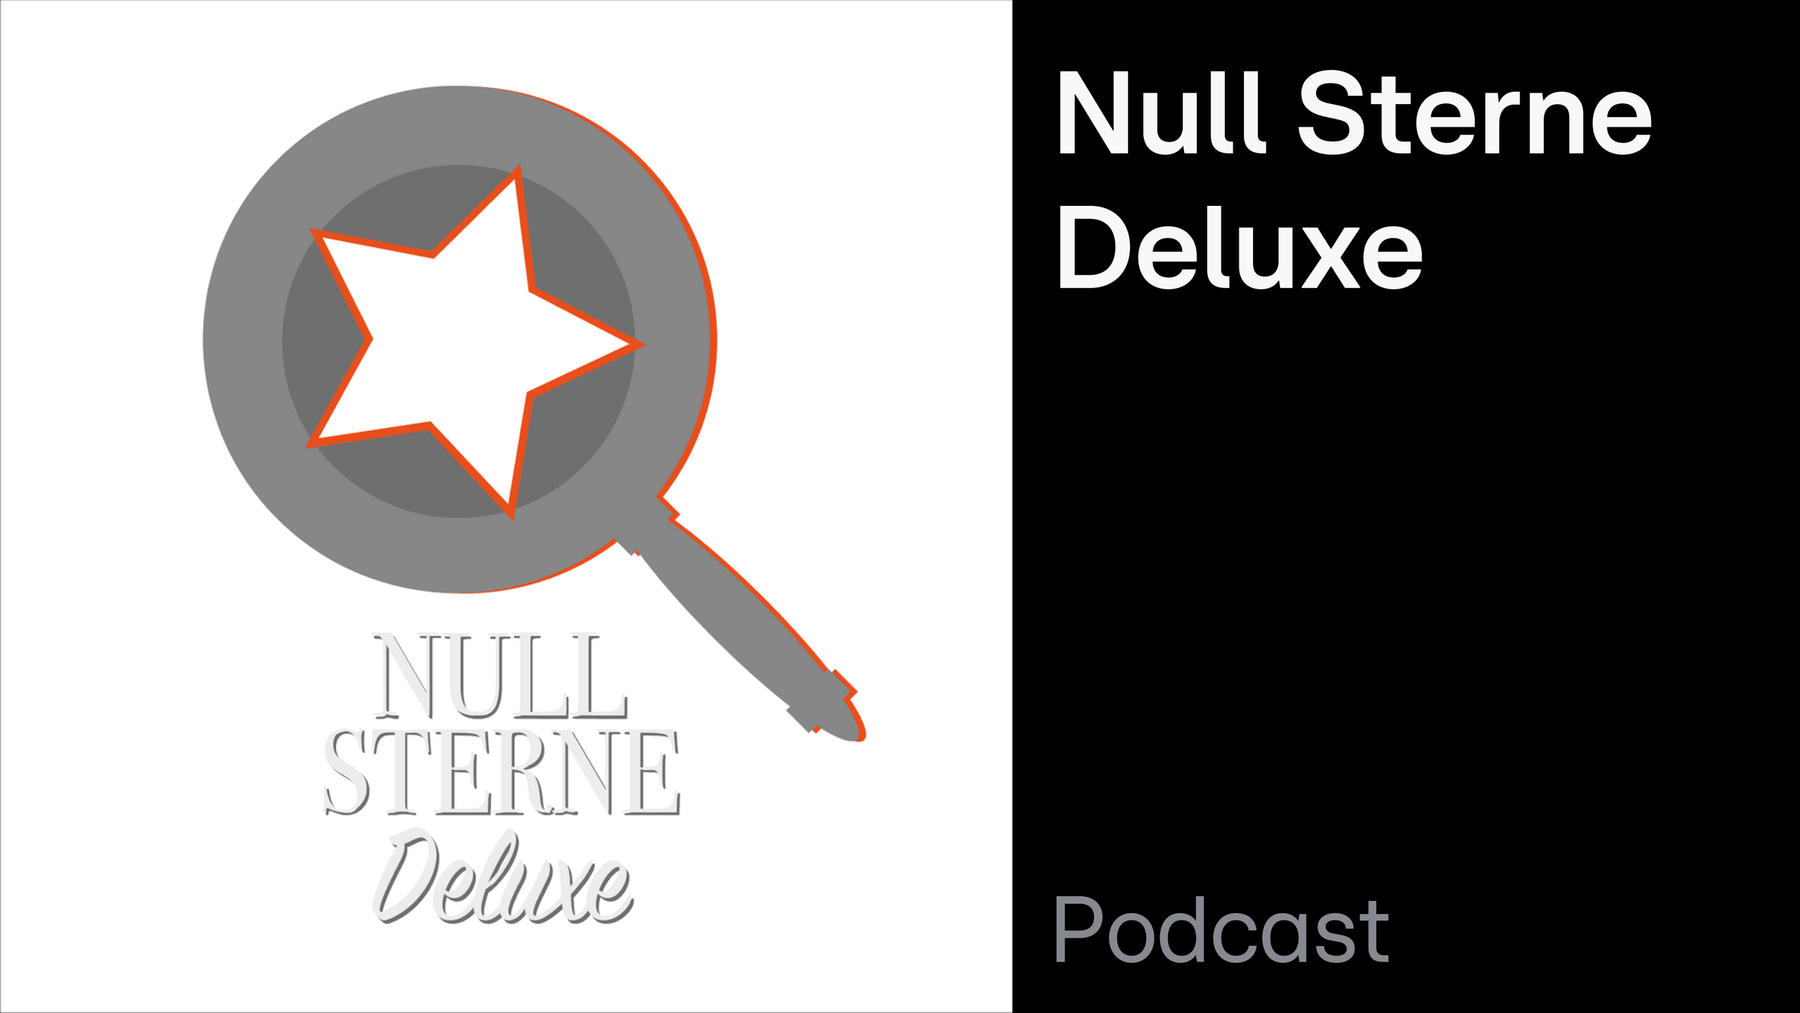 Podcast: Null Sterne Deluxe